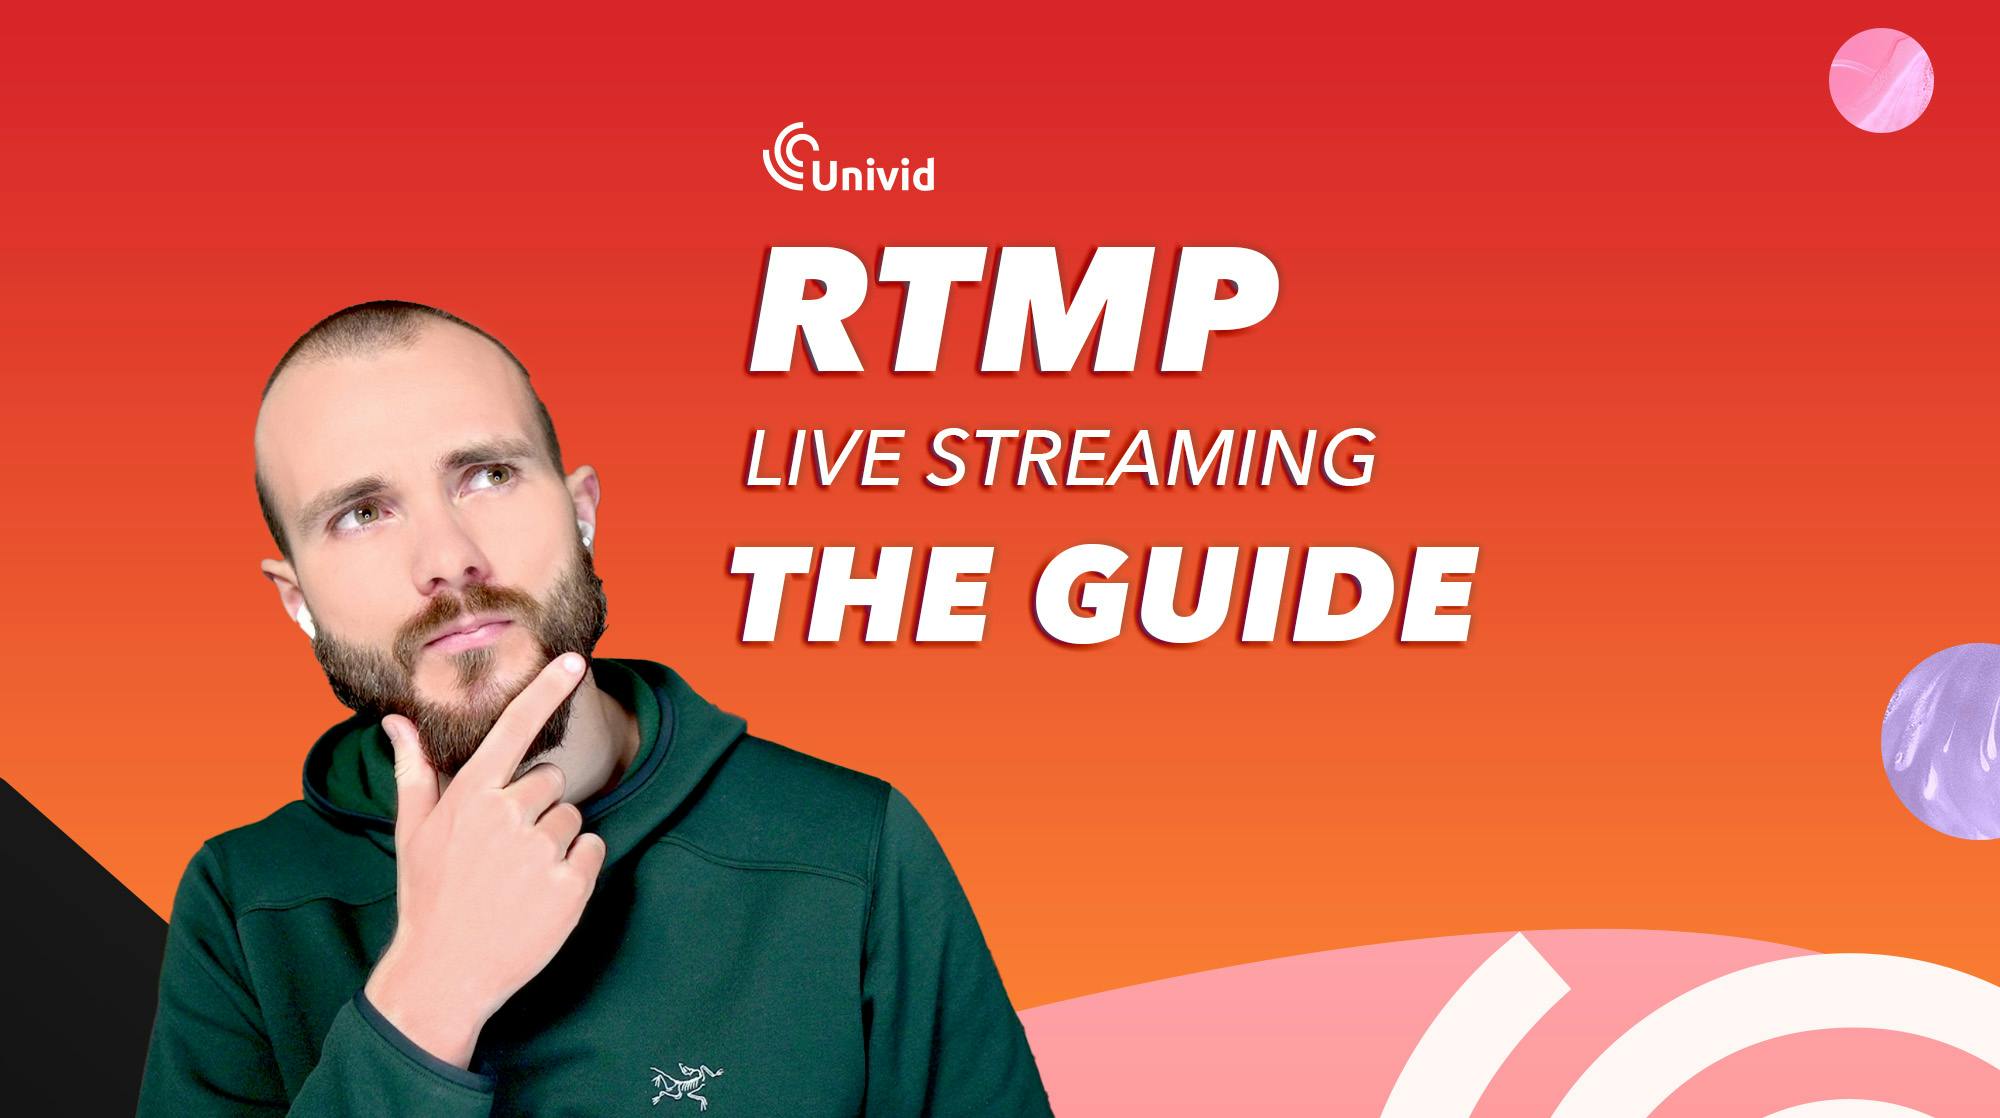 RTMP how to guide: Live streaming using RTMP